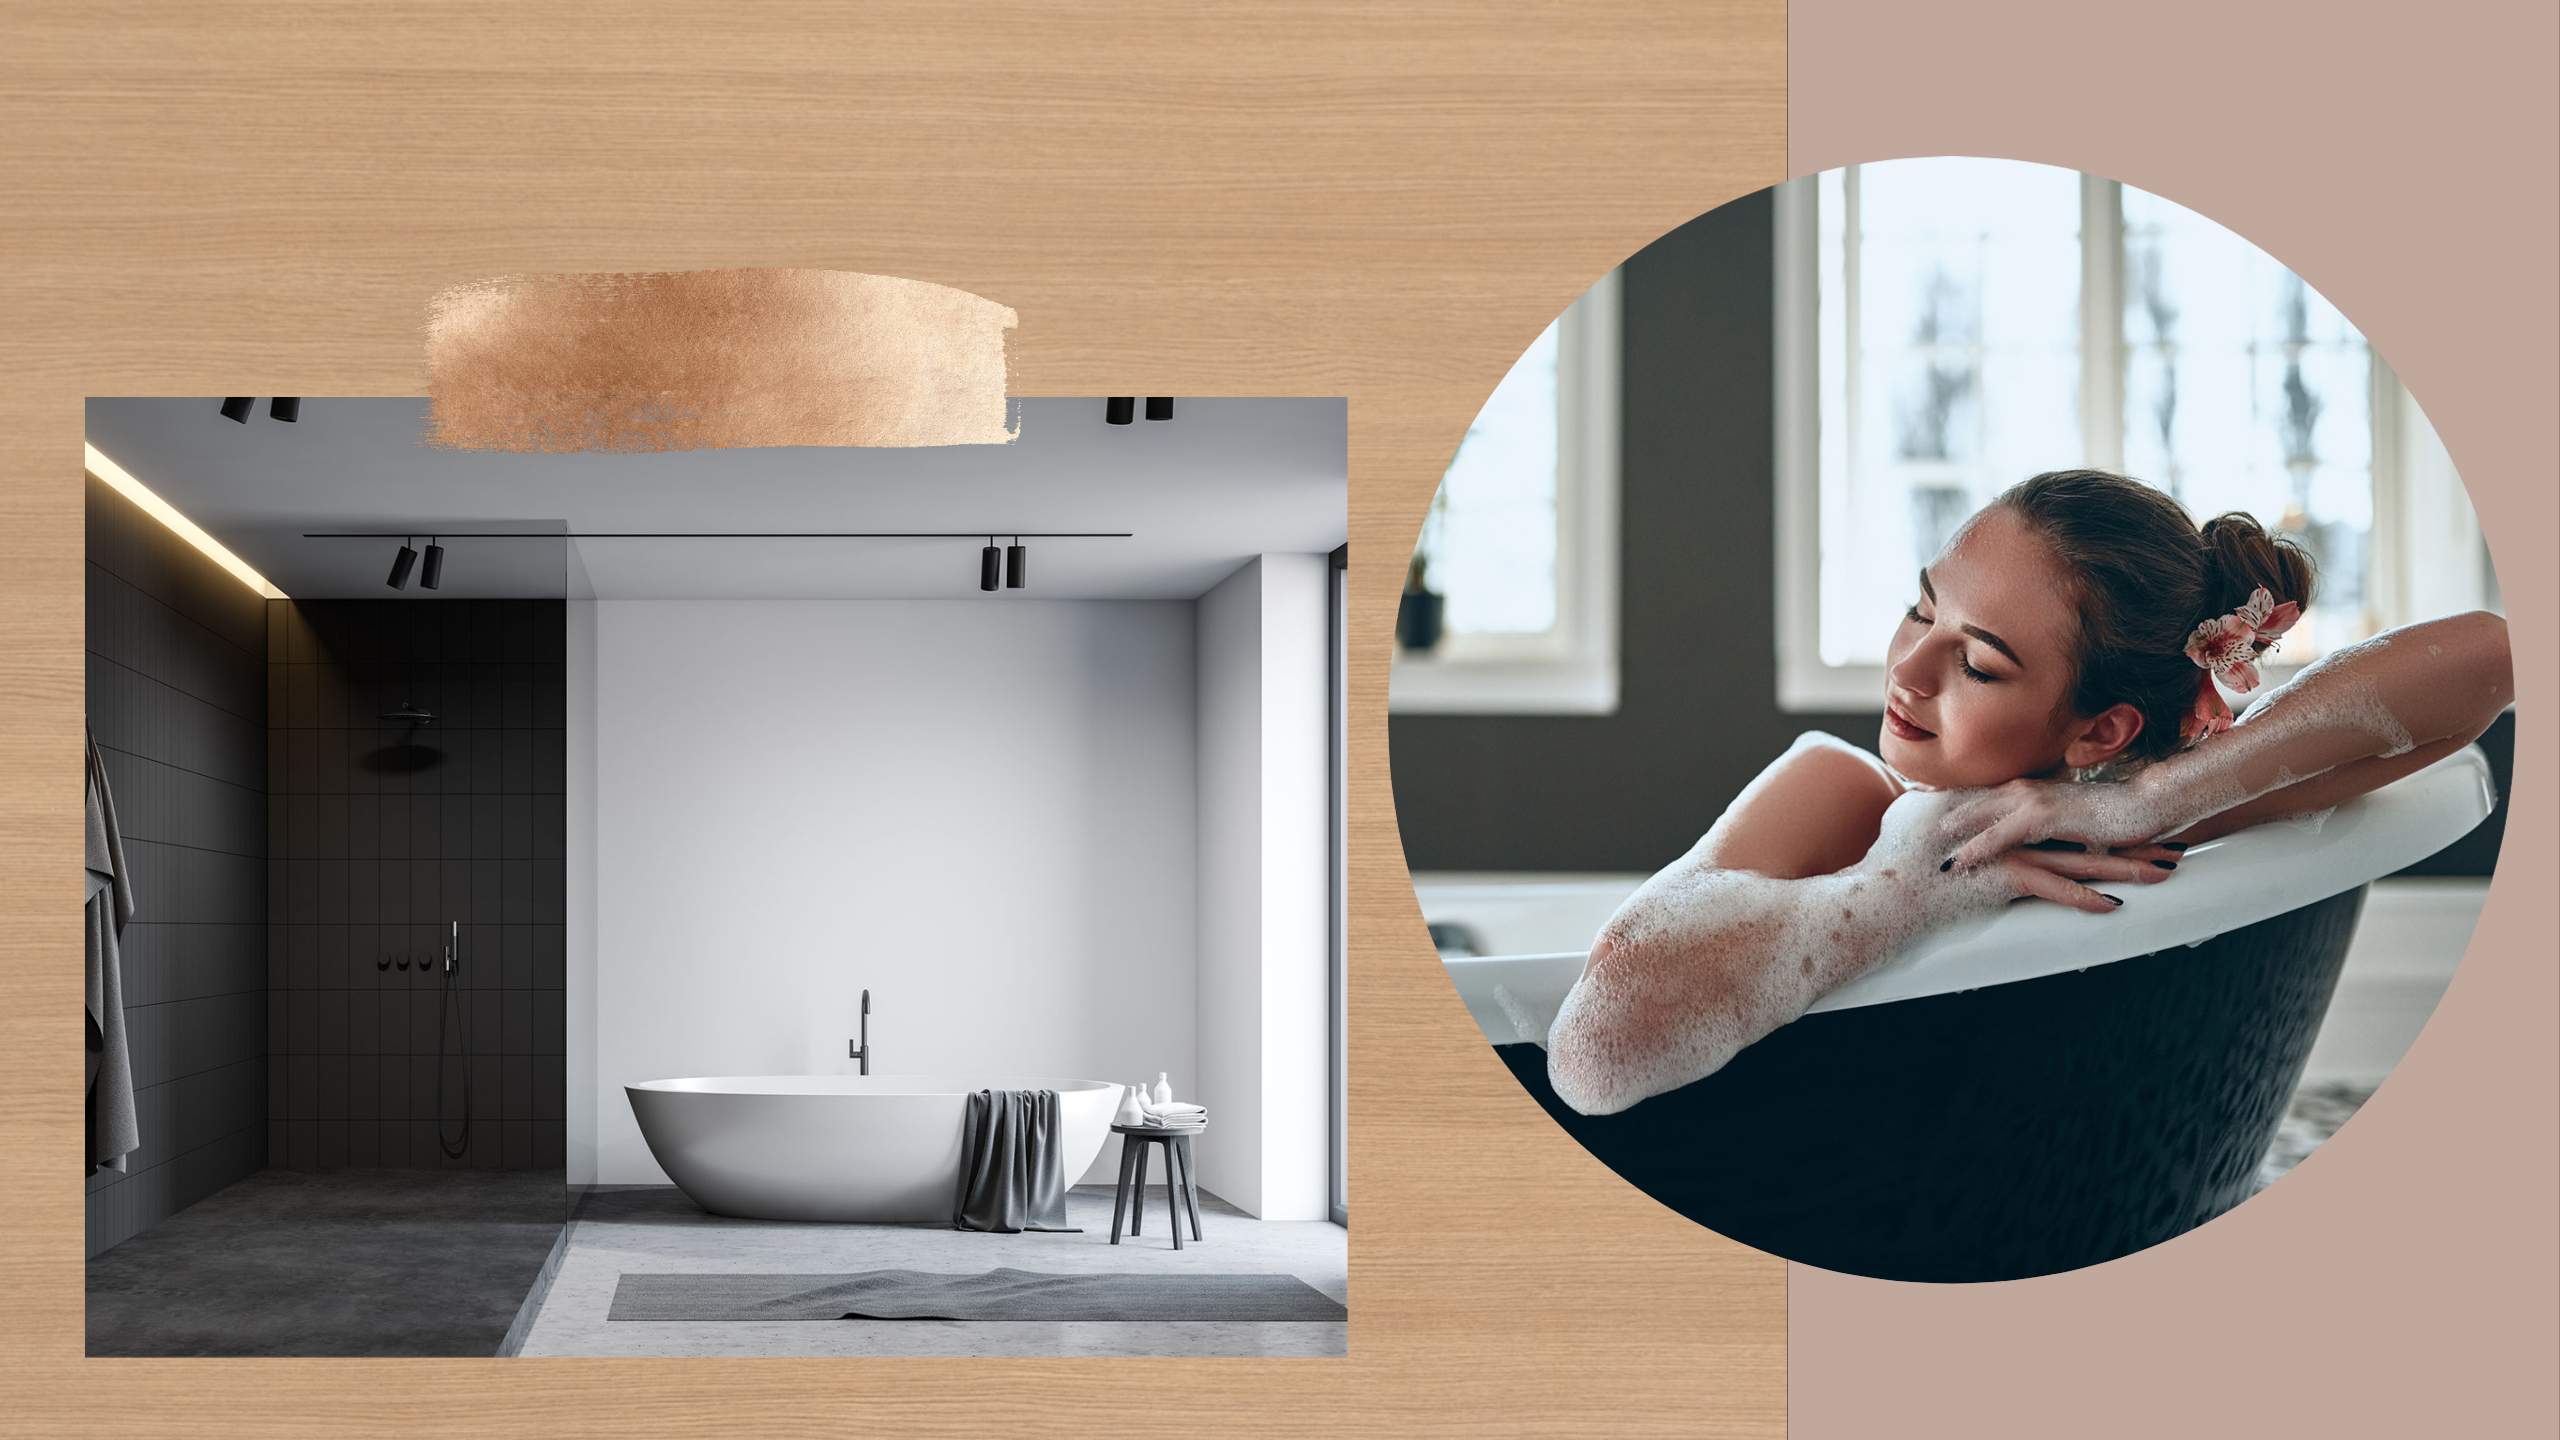 The Bathroom as a Center for Wellness in the Home